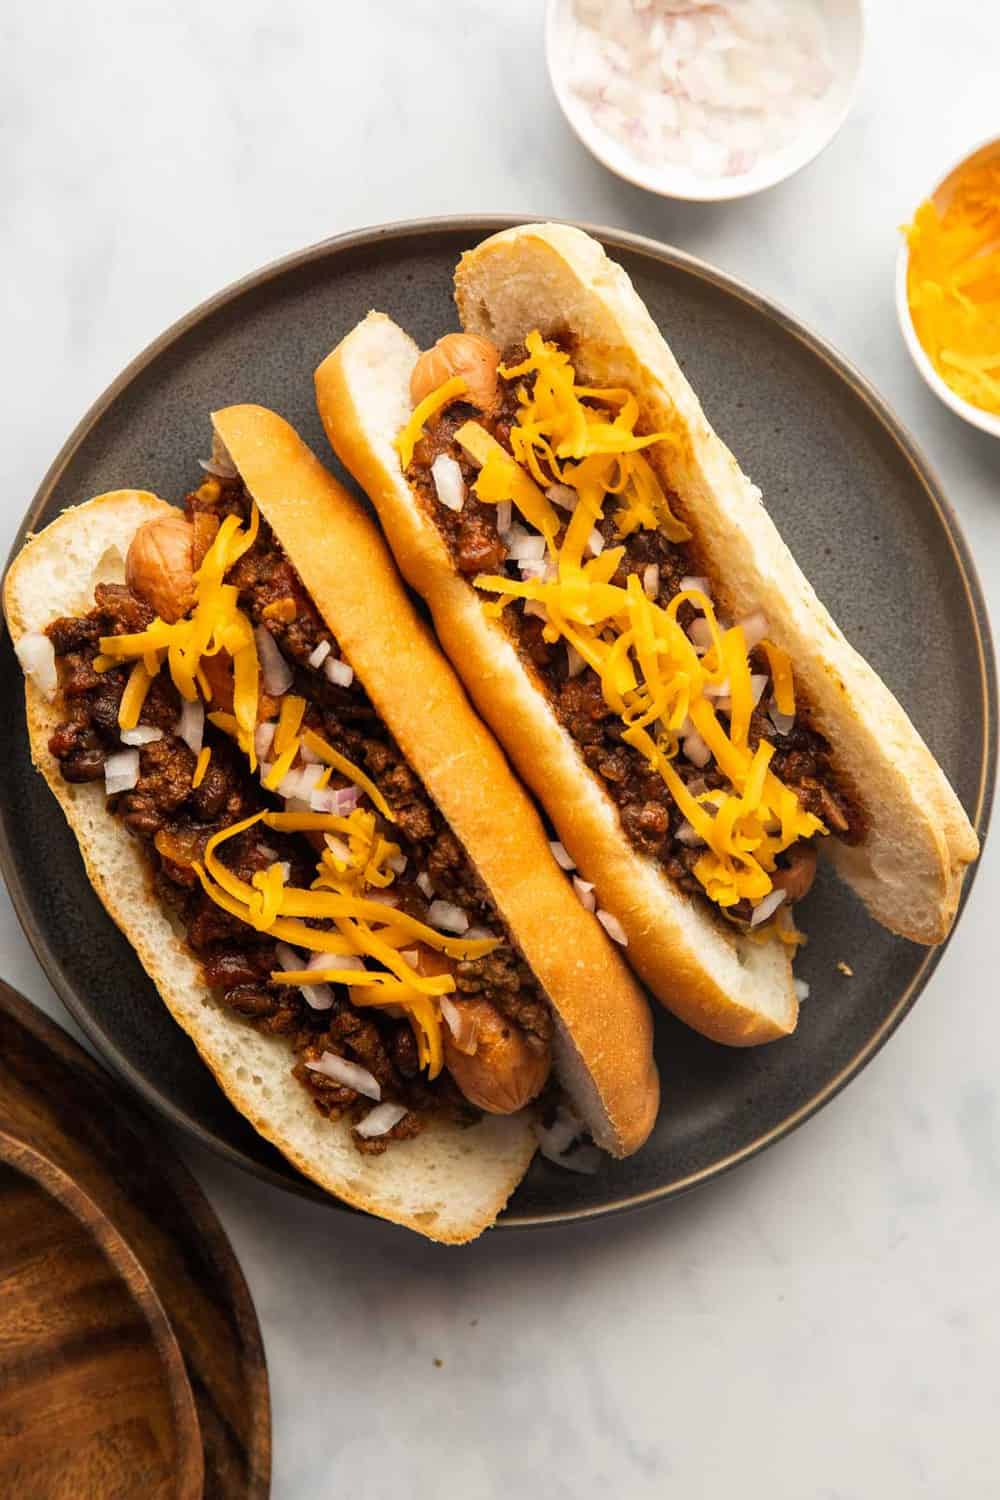 Chili Dogs served on a plate with shredded cheddar and onions on the side